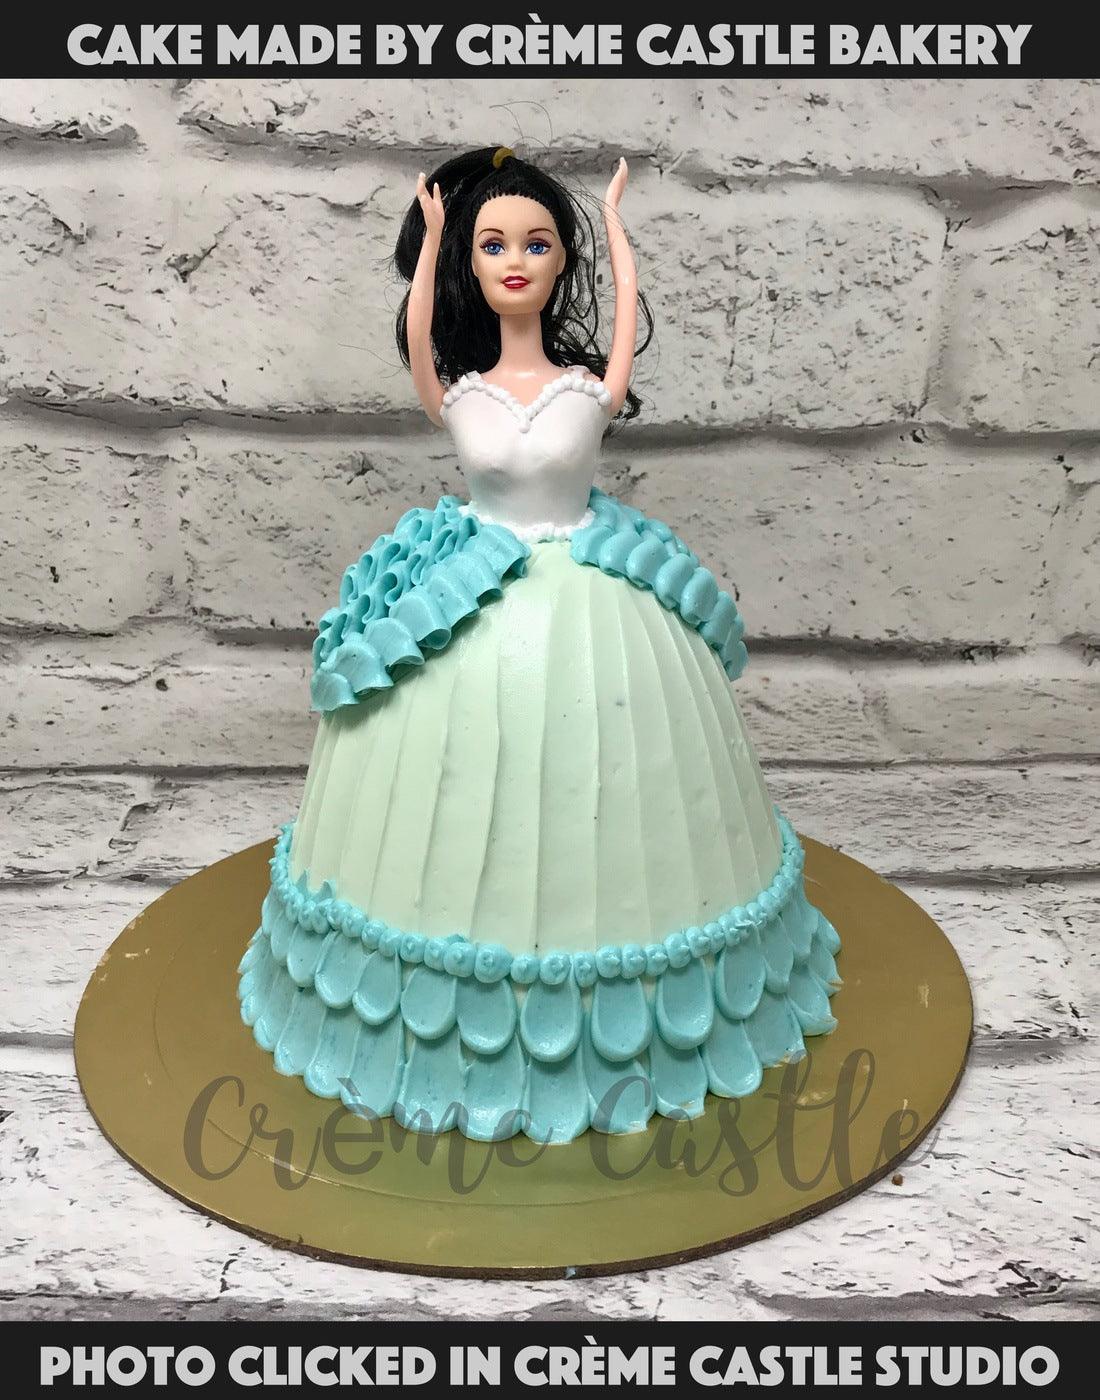 Dancing Doll in Blue Cake - Creme Castle